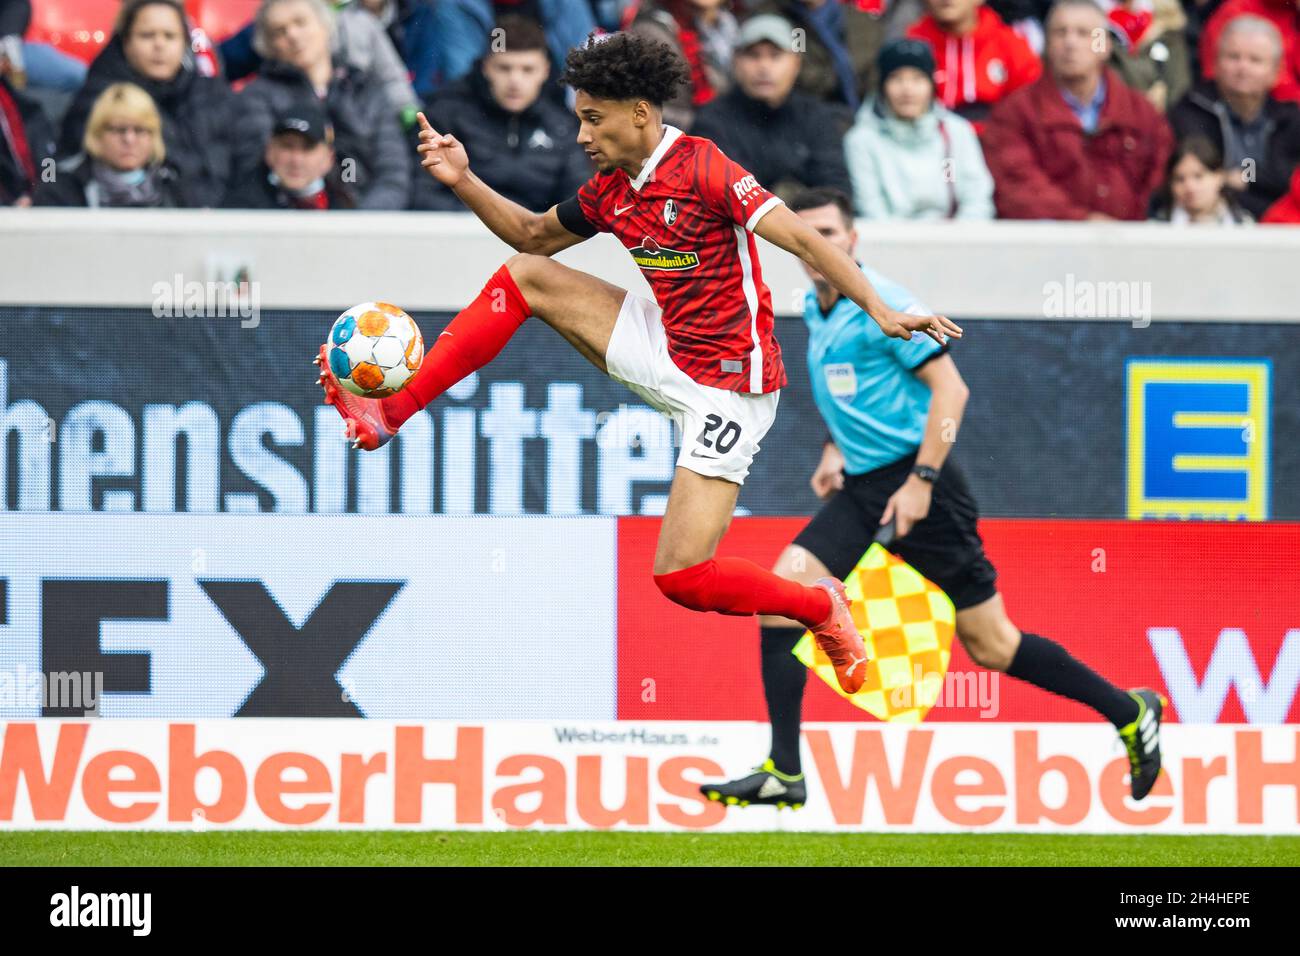 30 October 2021, Baden-Wuerttemberg, Freiburg im Breisgau: Football: Bundesliga, SC Freiburg - SpVgg Greuther Fürth, Matchday 10, Europa-Park Stadion. Freiburg's Kevin Schade in action. IMPORTANT NOTE: In accordance with the regulations of the DFL Deutsche Fußball Liga and the DFB Deutscher Fußball-Bund, it is prohibited to use or have used photographs taken in the stadium and/or of the match in the form of sequence pictures and/or video-like photo series. Photo: Tom Weller/dpa - IMPORTANT NOTE: In accordance with the regulations of the DFL Deutsche Fußball Liga and/or the DFB Deutscher Fußbal Stock Photo